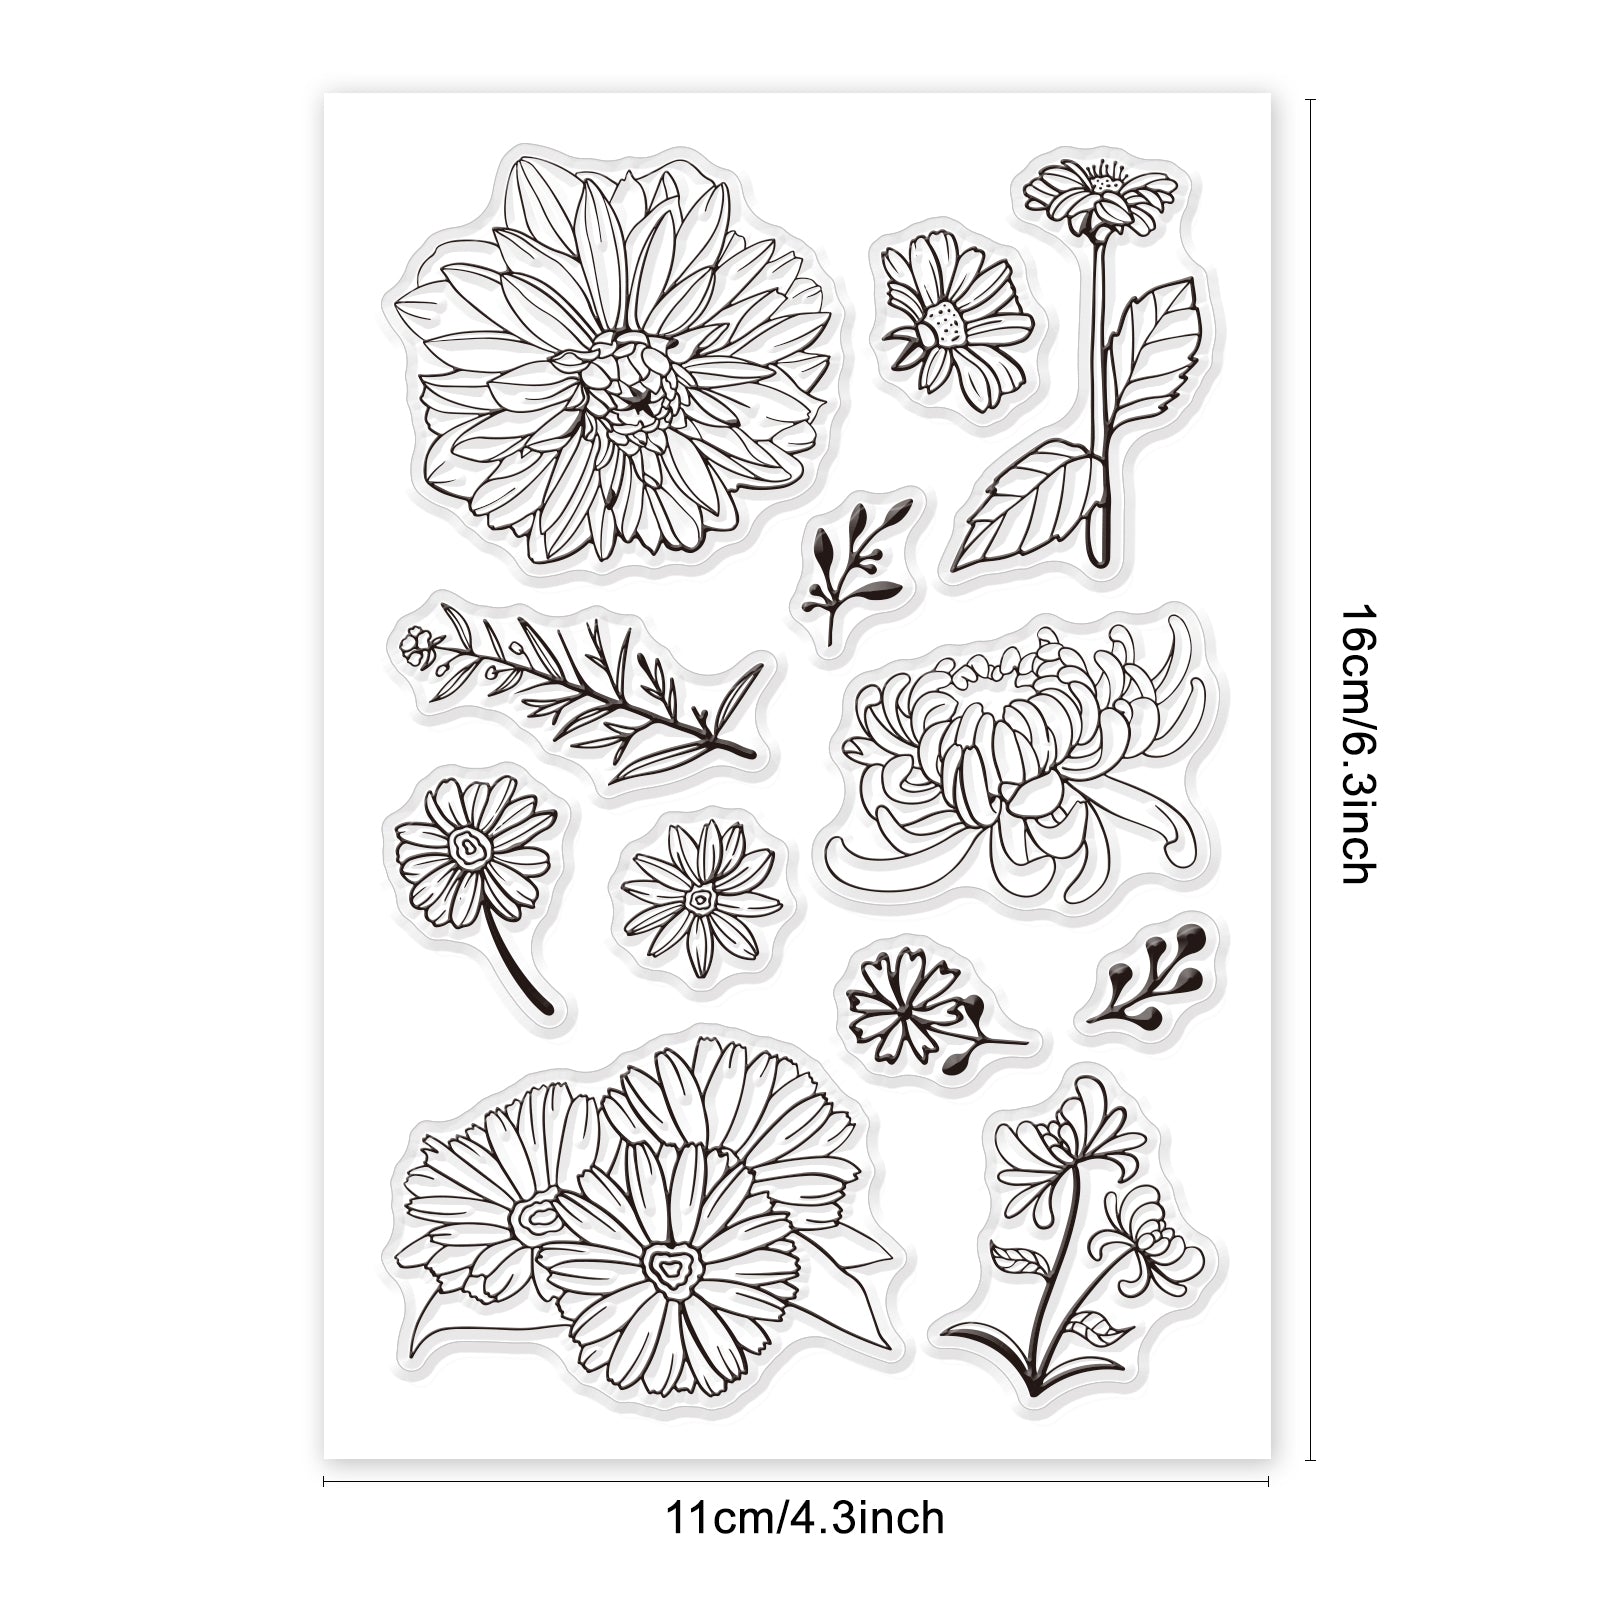 GLOBLELAND Daisy Flower Clear Stamps Silicone Stamp Cards Plant Chrysanthemum Clear Stamps for Card Making Decoration and DIY Scrapbooking